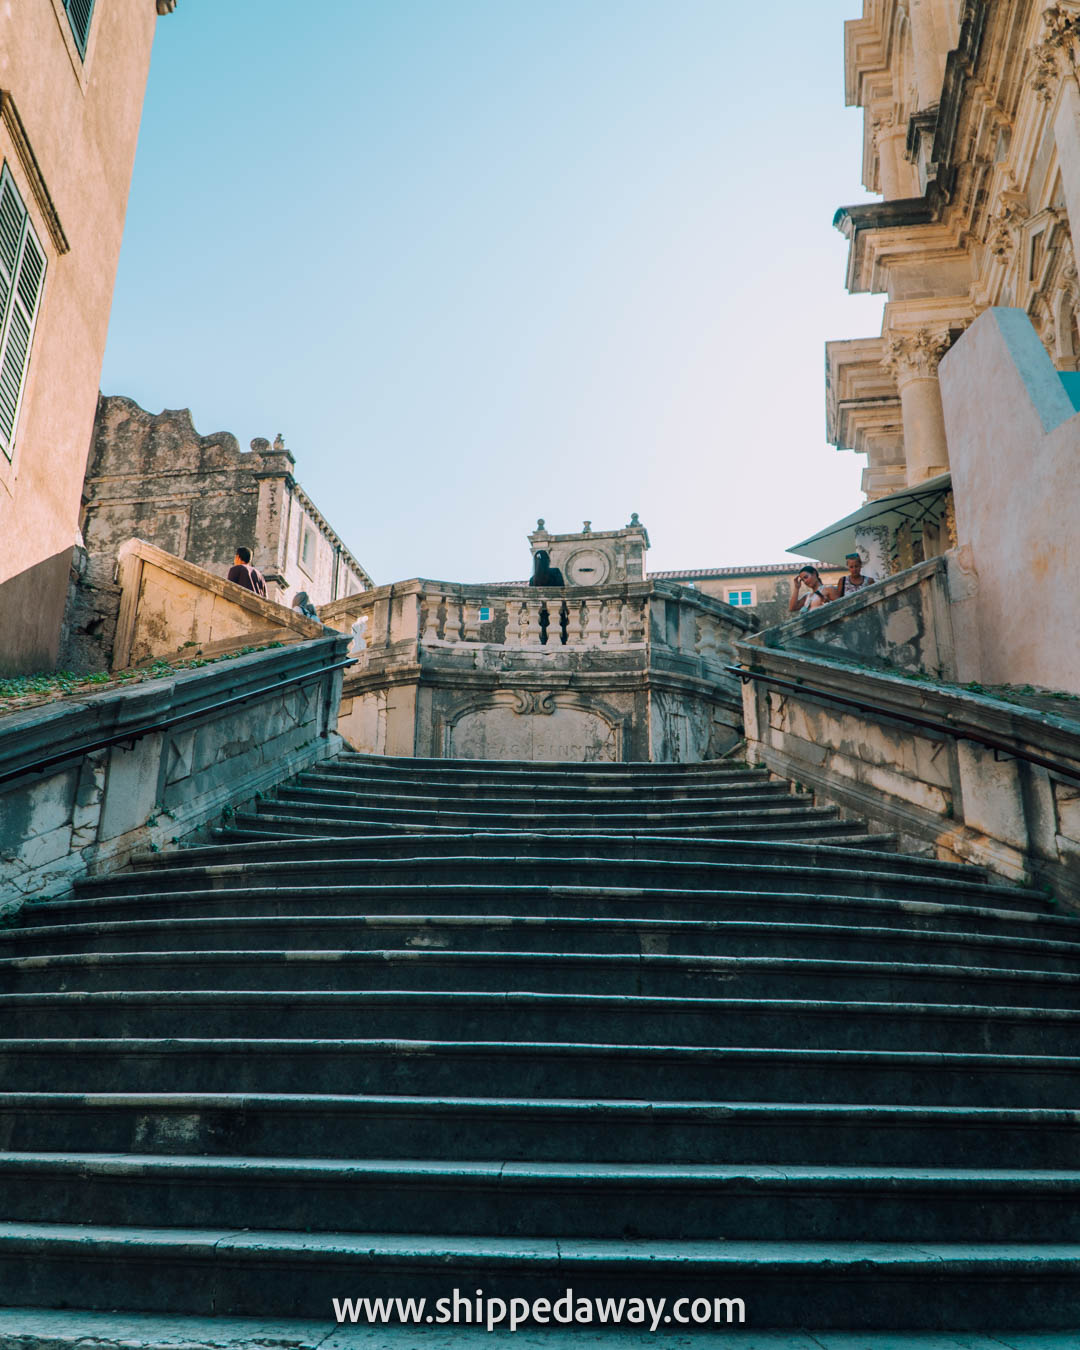 Church of St. Ignatius Dubrovnik Old Town - Jesuit Stairs Walk of Shame Steps Dubrovnik Old Town - Dubrovnik Old City - Dubrovnik Old Town Things To Do - Dubrovnik Old Town Attractions